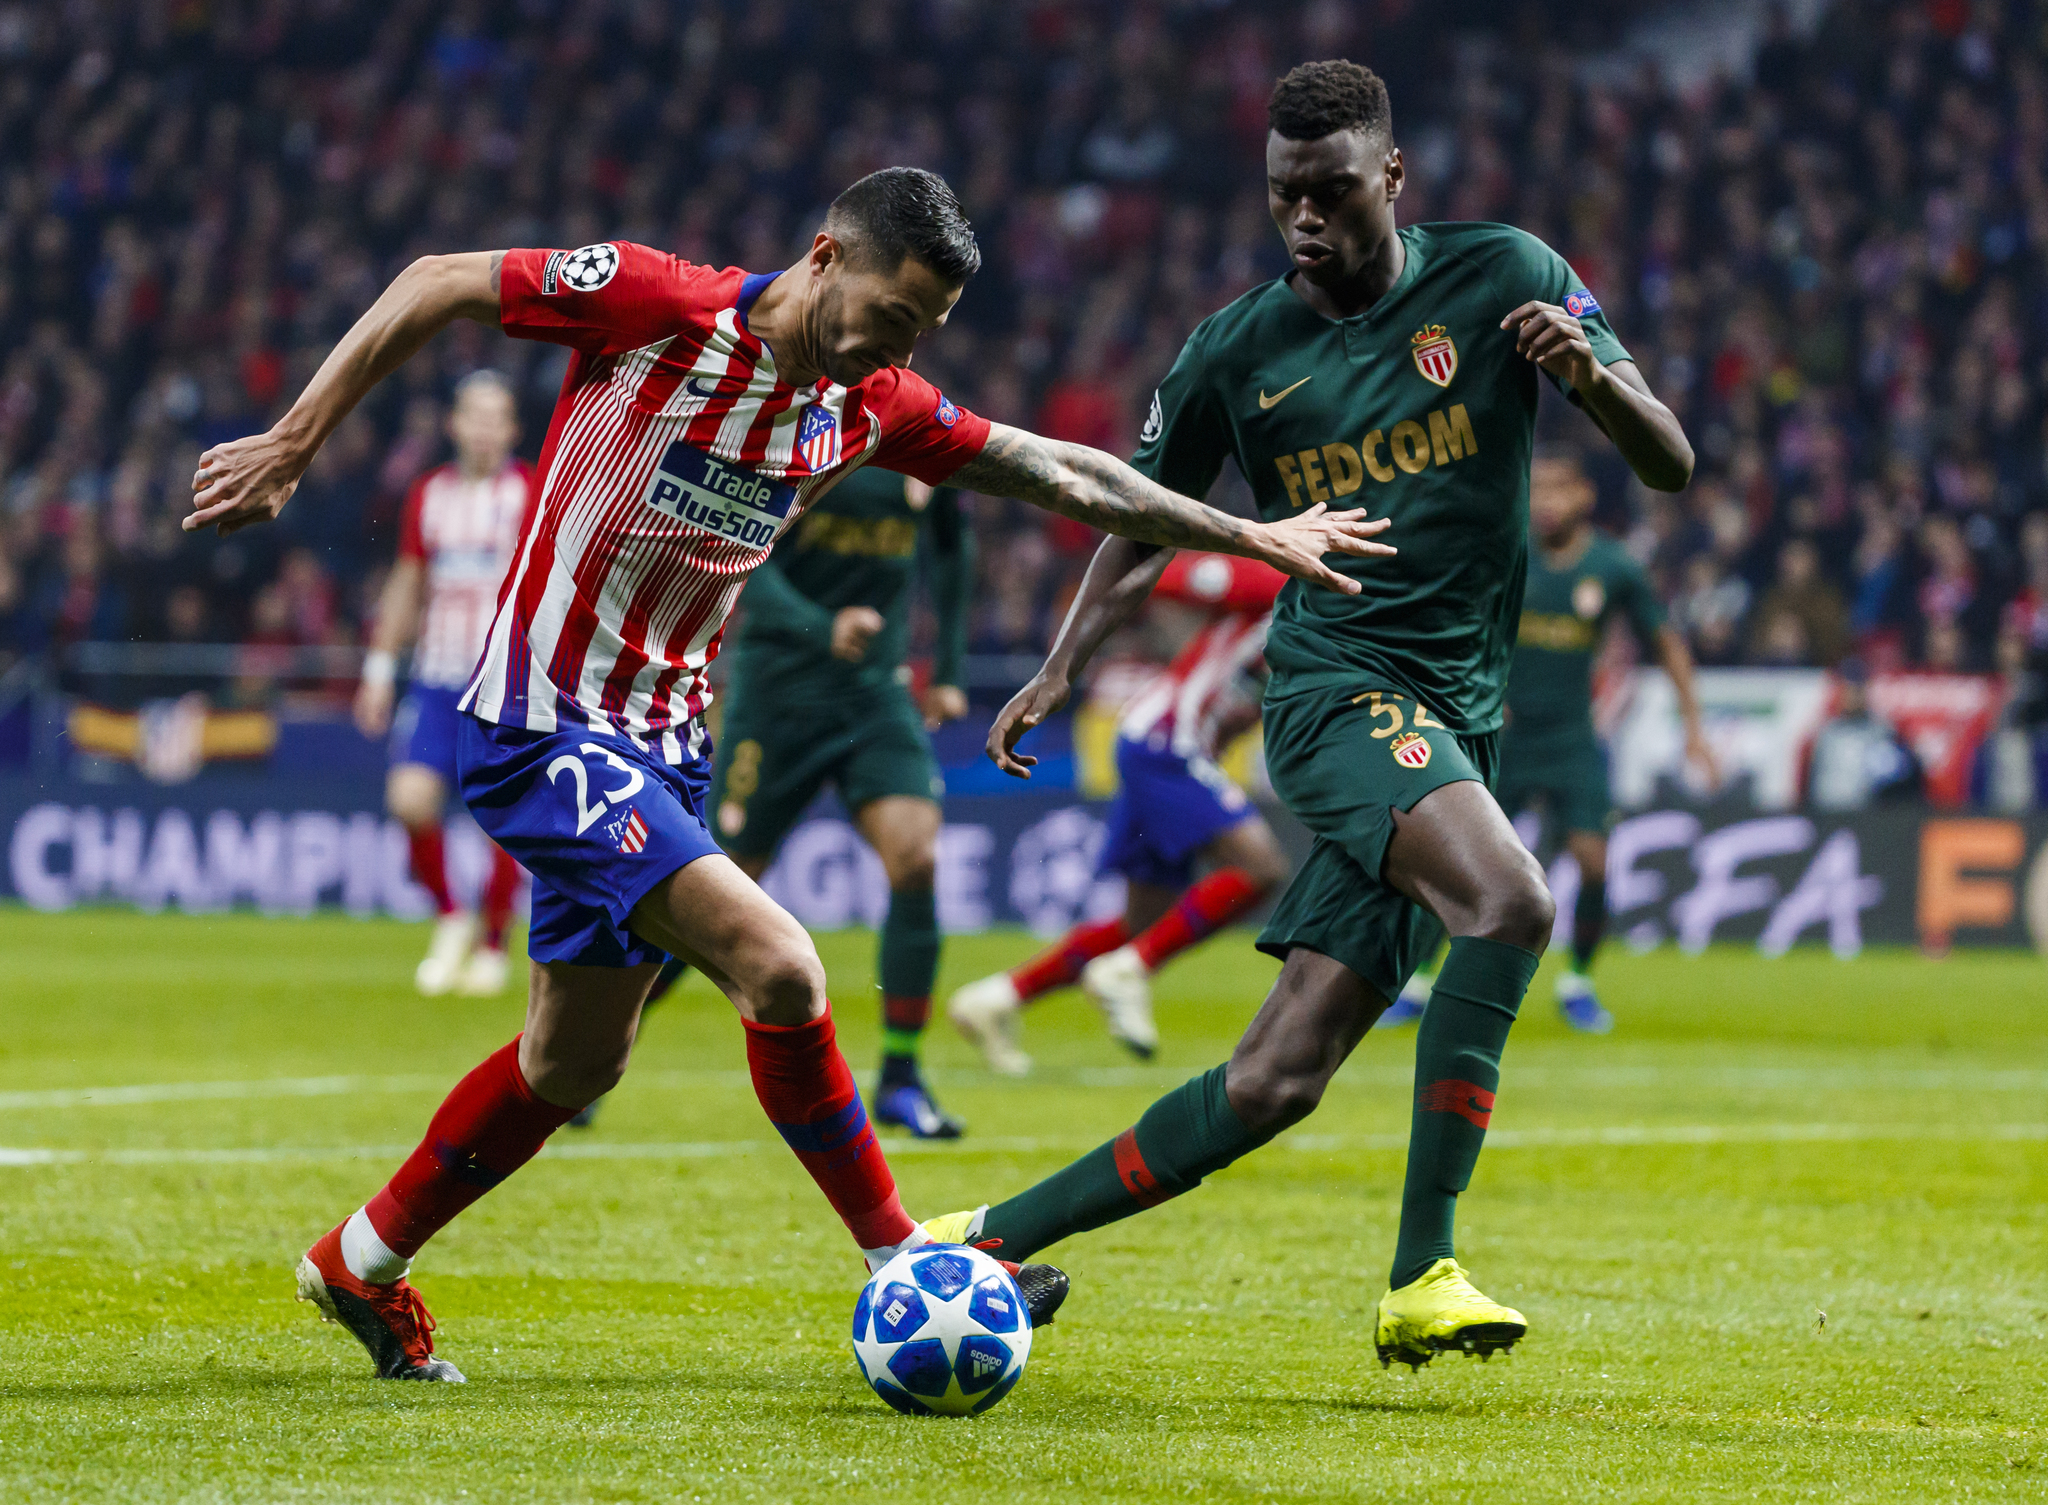 Badiashile in the Champions League duel against Atl